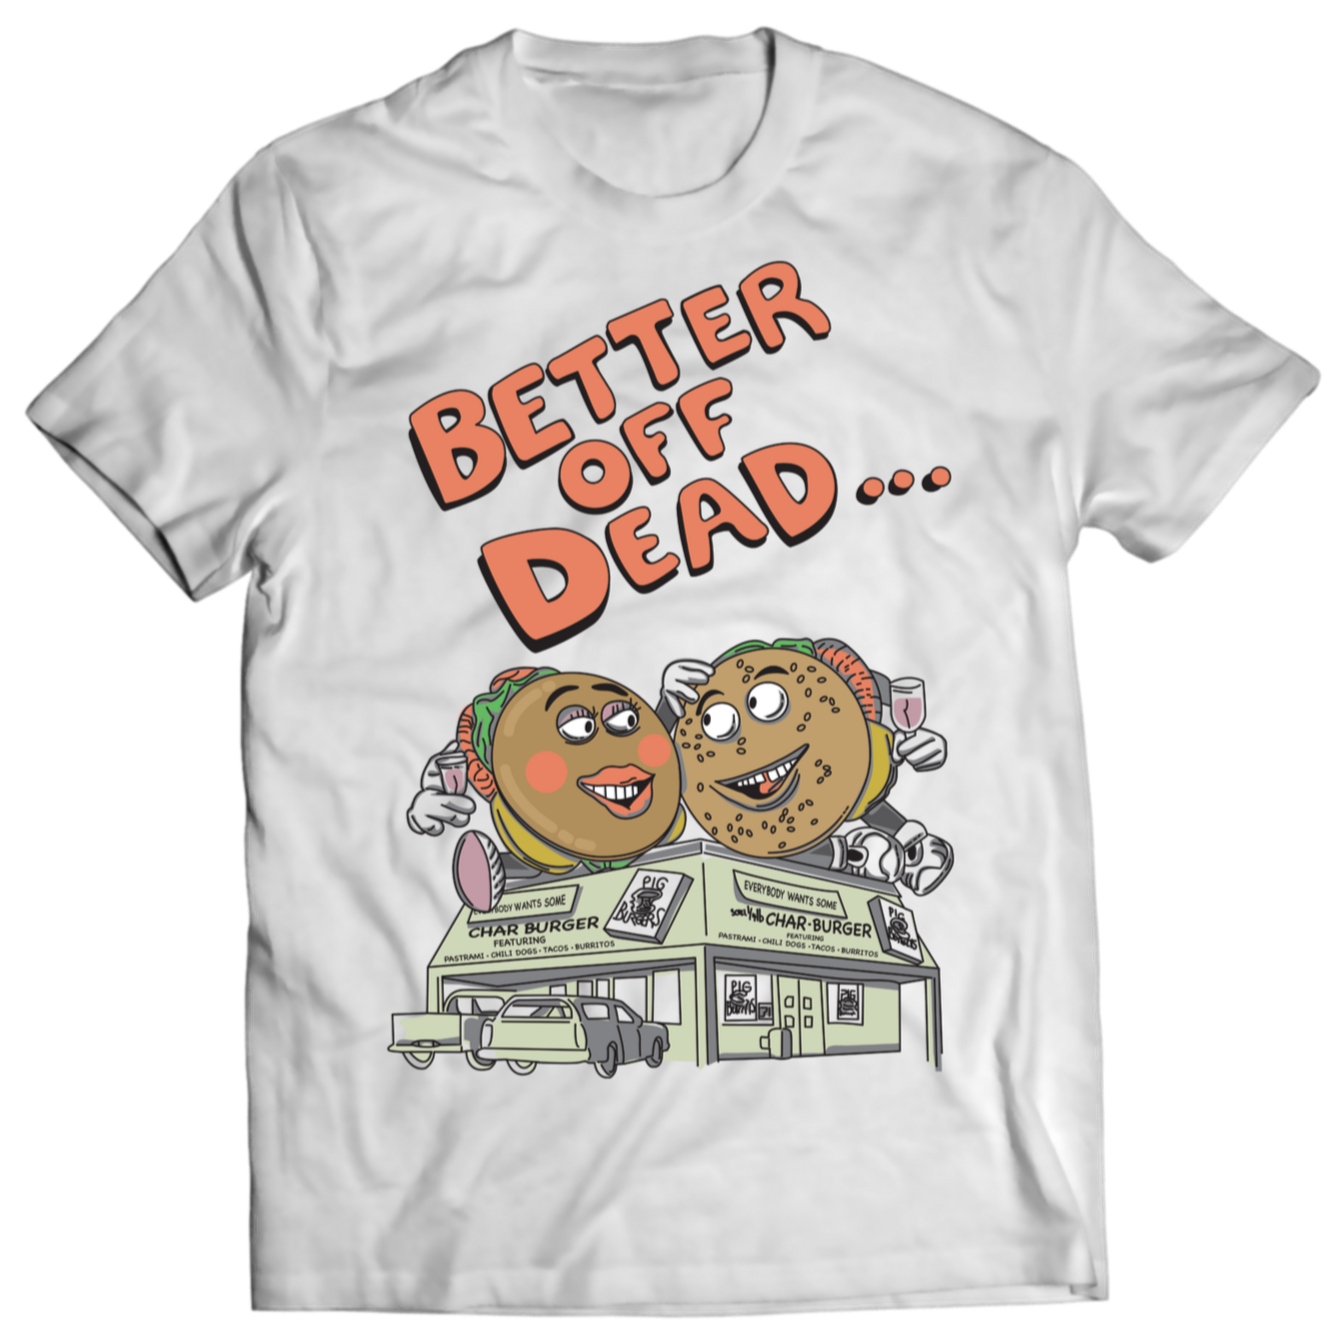 White t shirt with “Better Off Dead” in bubble orange lettering with image of claymation burger couple and Pig Burgers